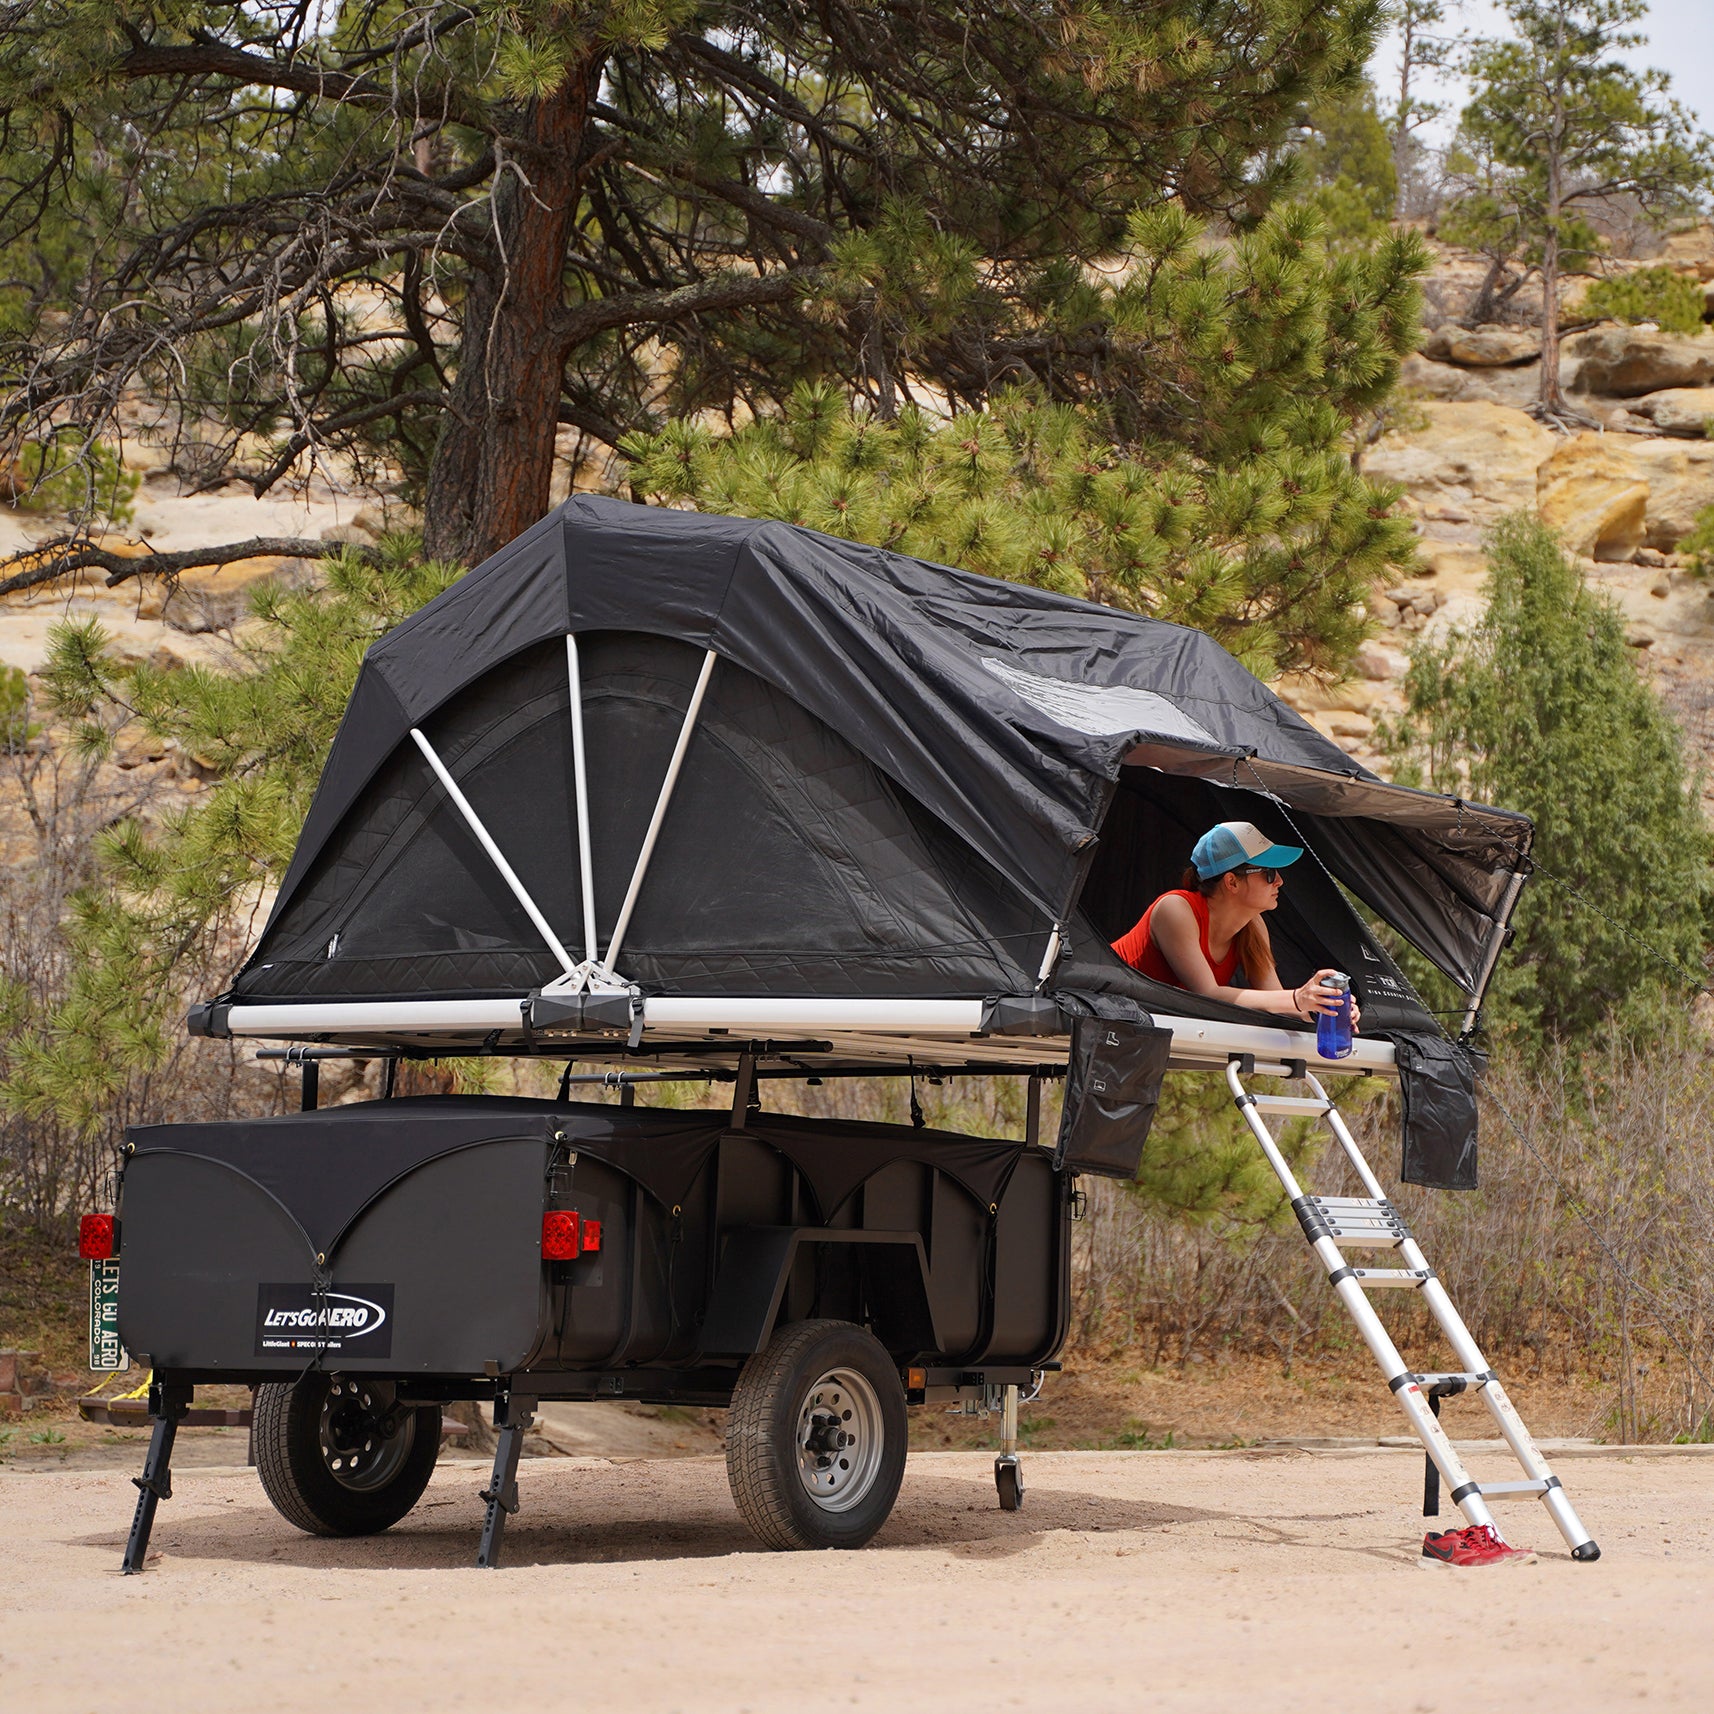 Unpacking the Joys of Let's Go Aero Trailers with a Rooftop Tent